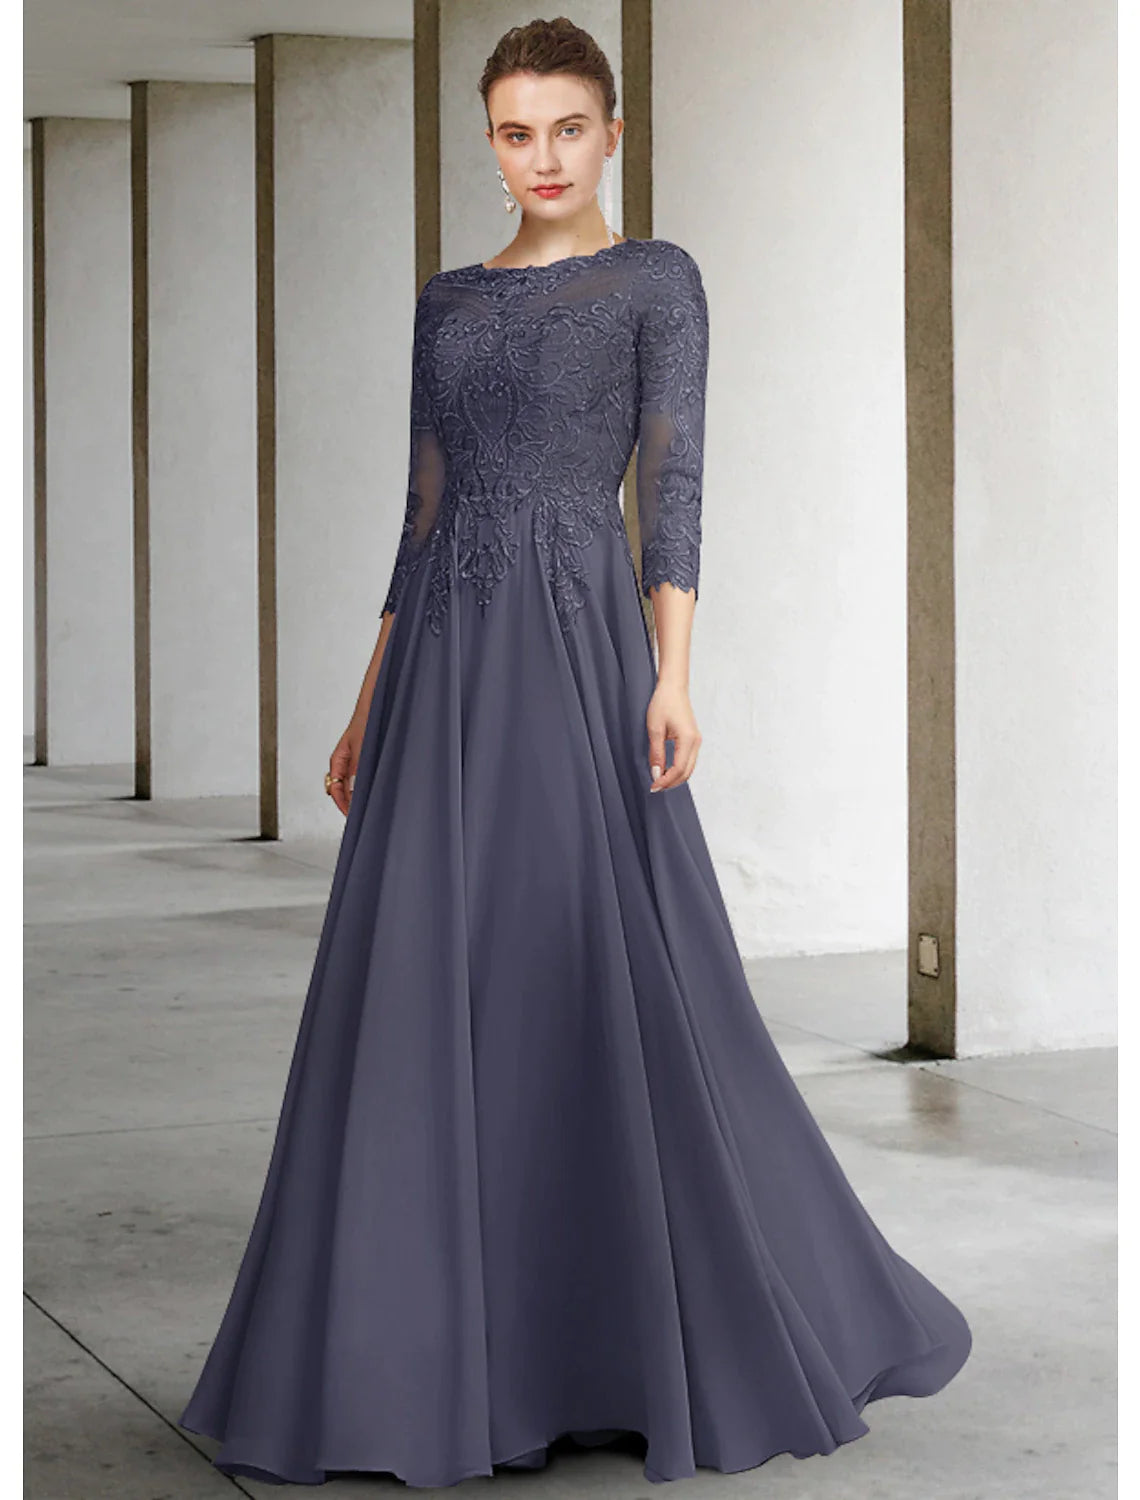 A-Line Mother of the Bride Dress Elegant Jewel Neck Floor Length Chiffon Lace 3/4 Length Sleeve with Pleats Appliques